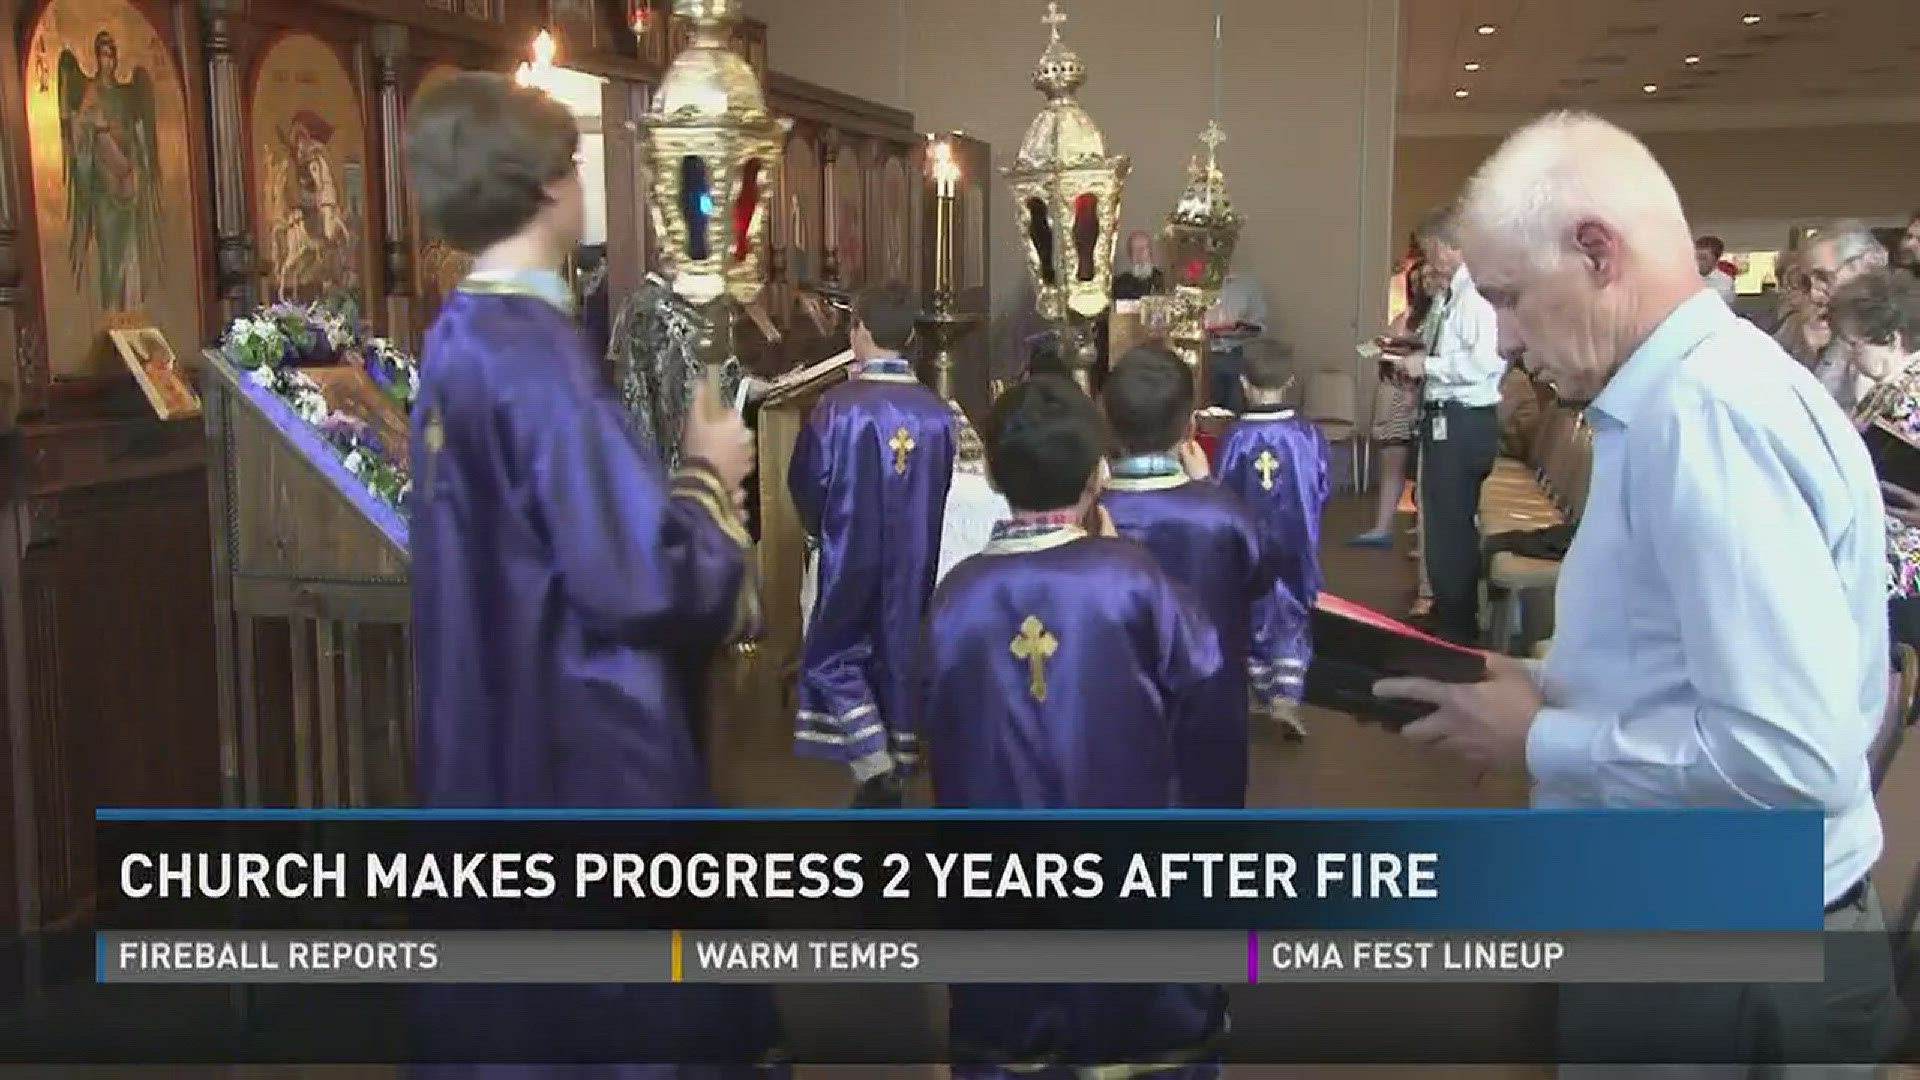 April 12, 2017: Two years after a fire damaged the St. George Greek Orthodox Church, the church held a service to mark the day and look forward to finishing the rebuilding process.